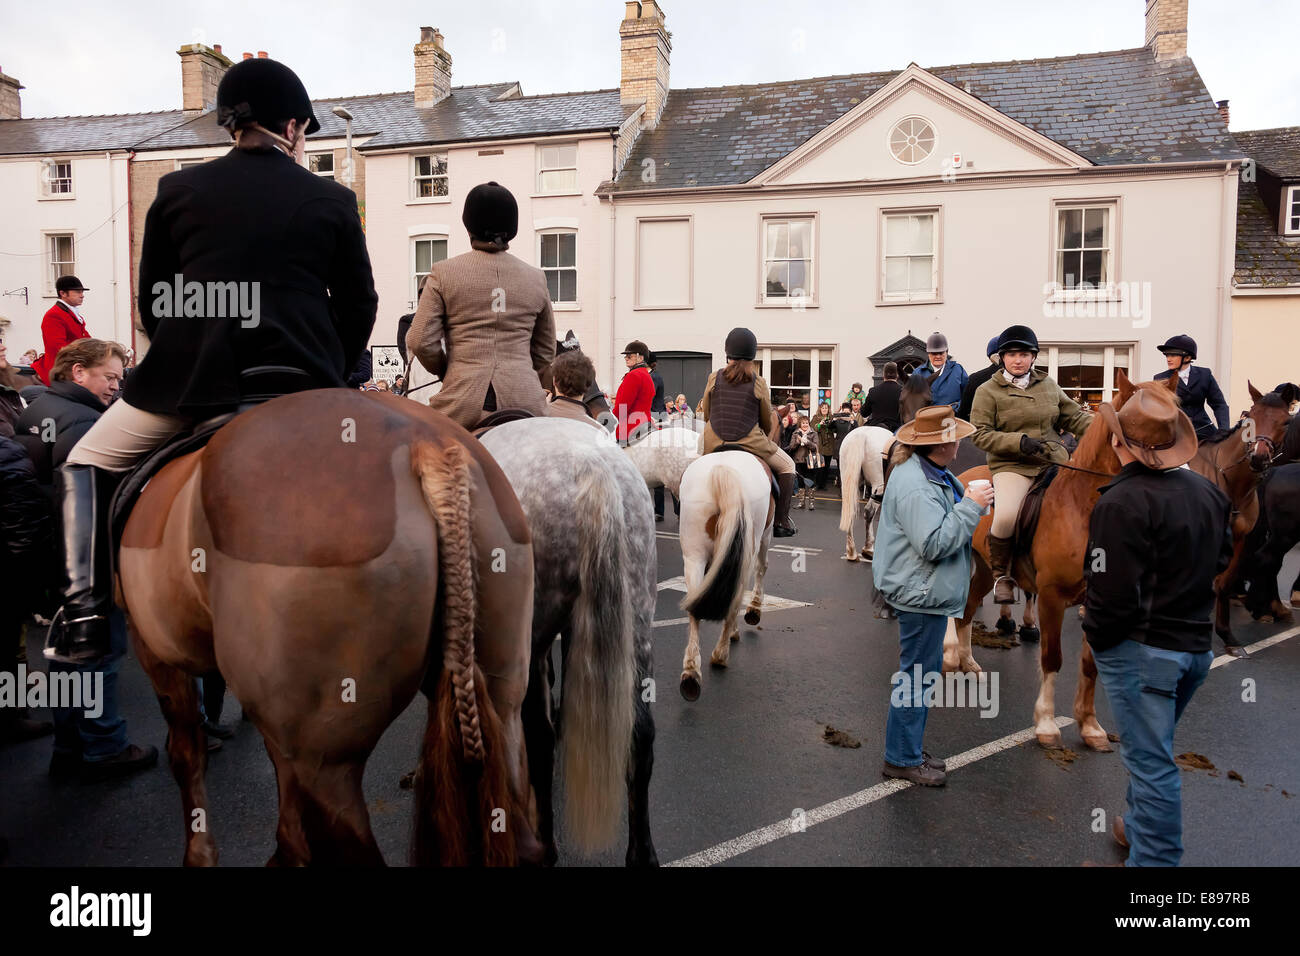 Horses and riders assembled with hunt supporters Stock Photo